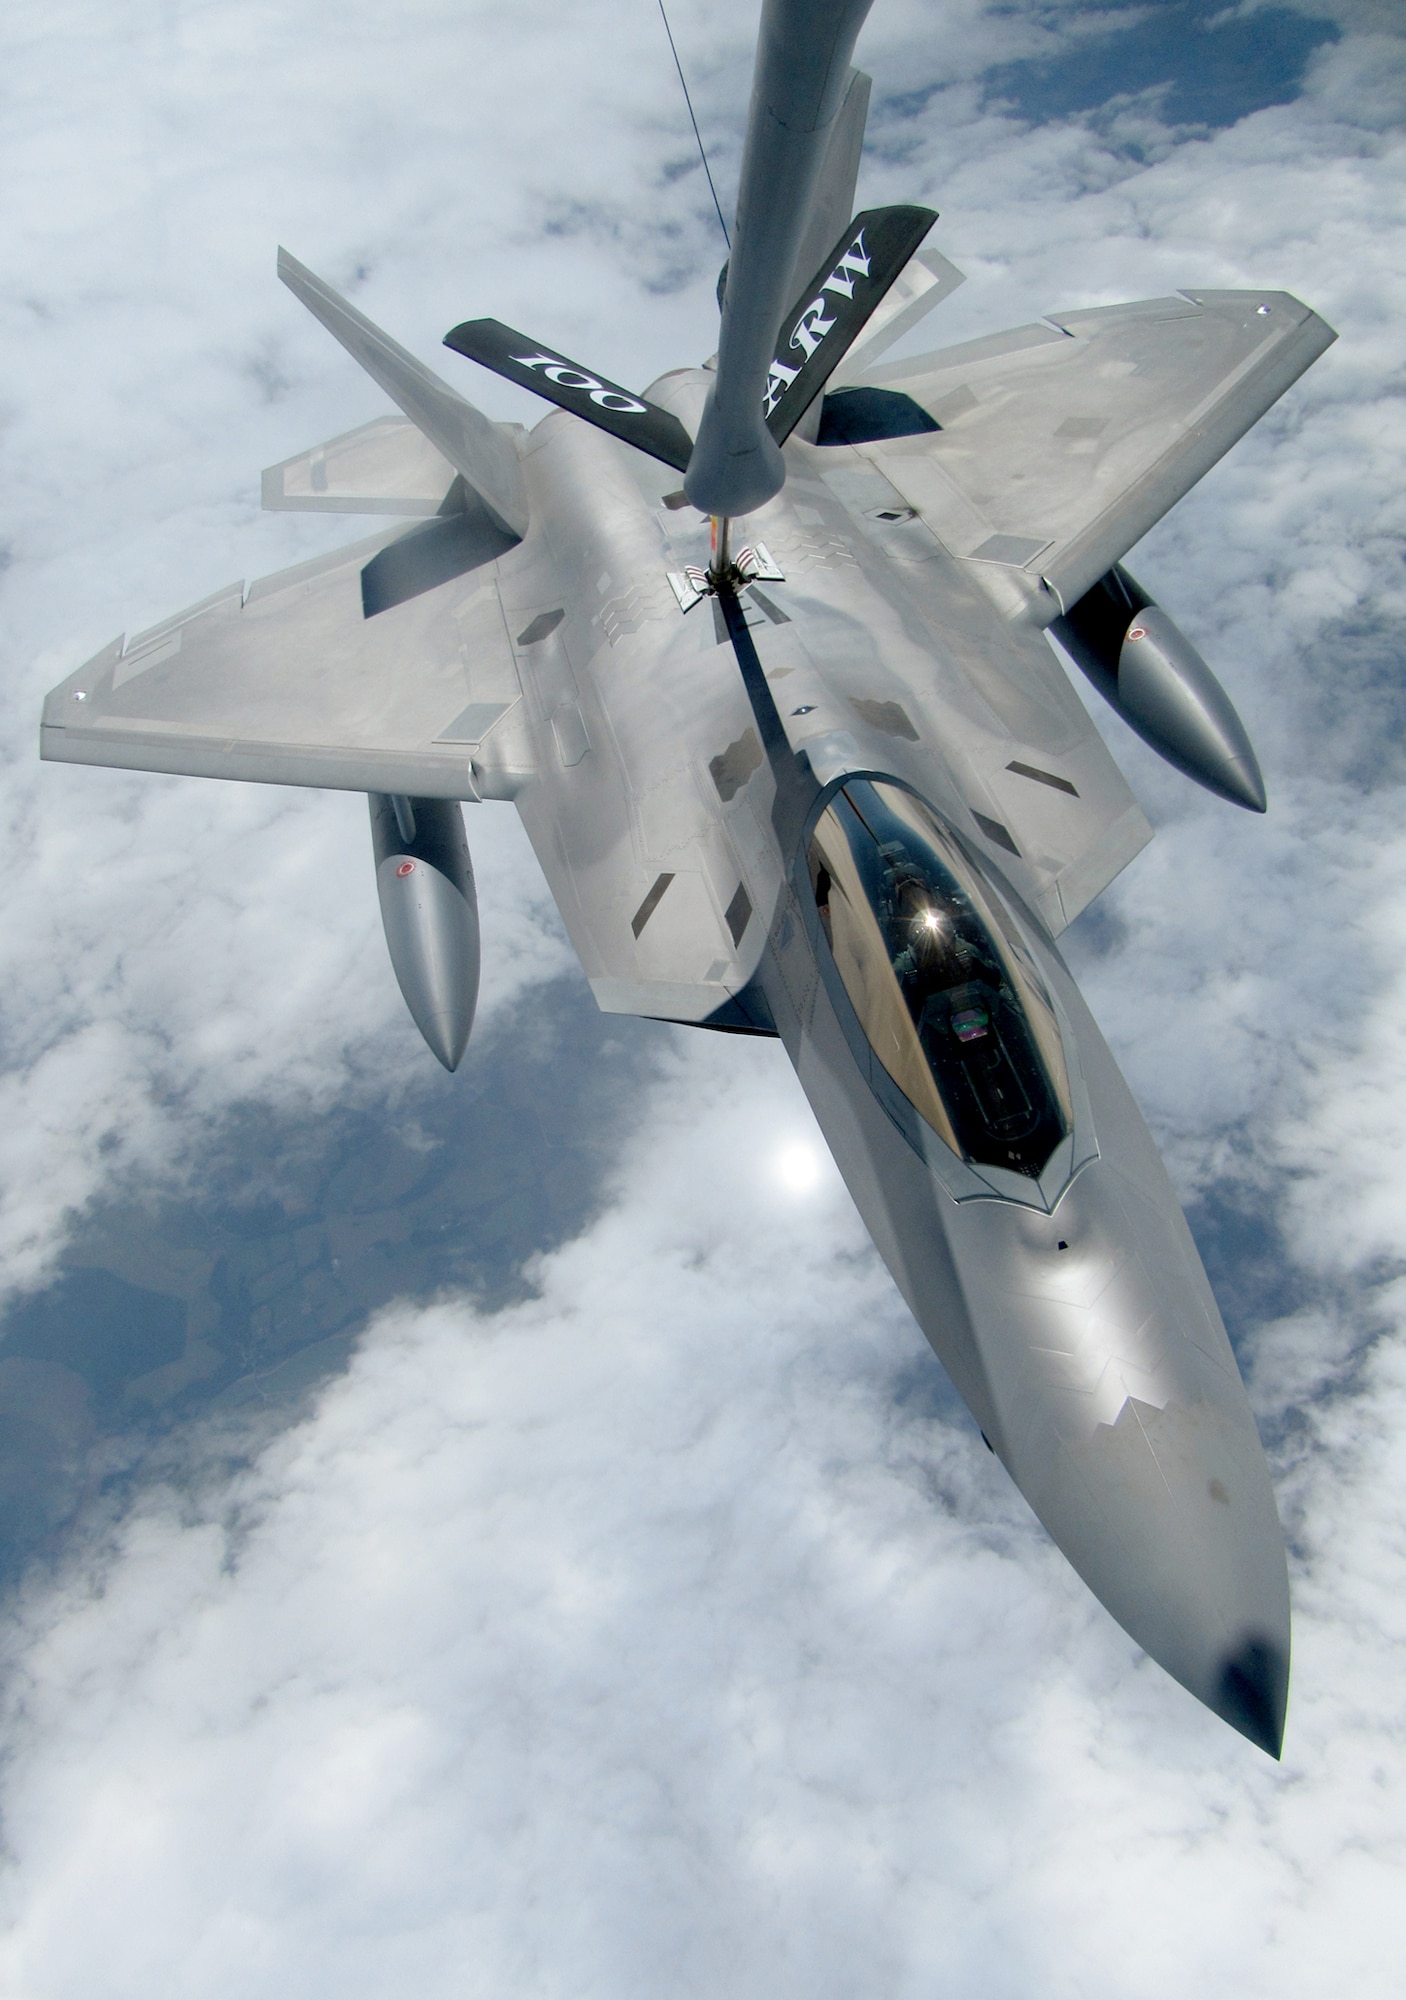 An F-22 Raptor from Elmendorf Air Force Base, Alaska, takes gas from a KC-135 Stratotanker July 27, 2010. By flying with a tanker, the fighter could routinely fill its fuel tanks to ensure it had enough fuel to reach a safe base in the event it had to land. The tanker is assigned to the 100th Air Refueling Wing at Royal Air Force Mildenhall, England. (U.S. Air Force photo/Staff Sgt. Austin M. May)